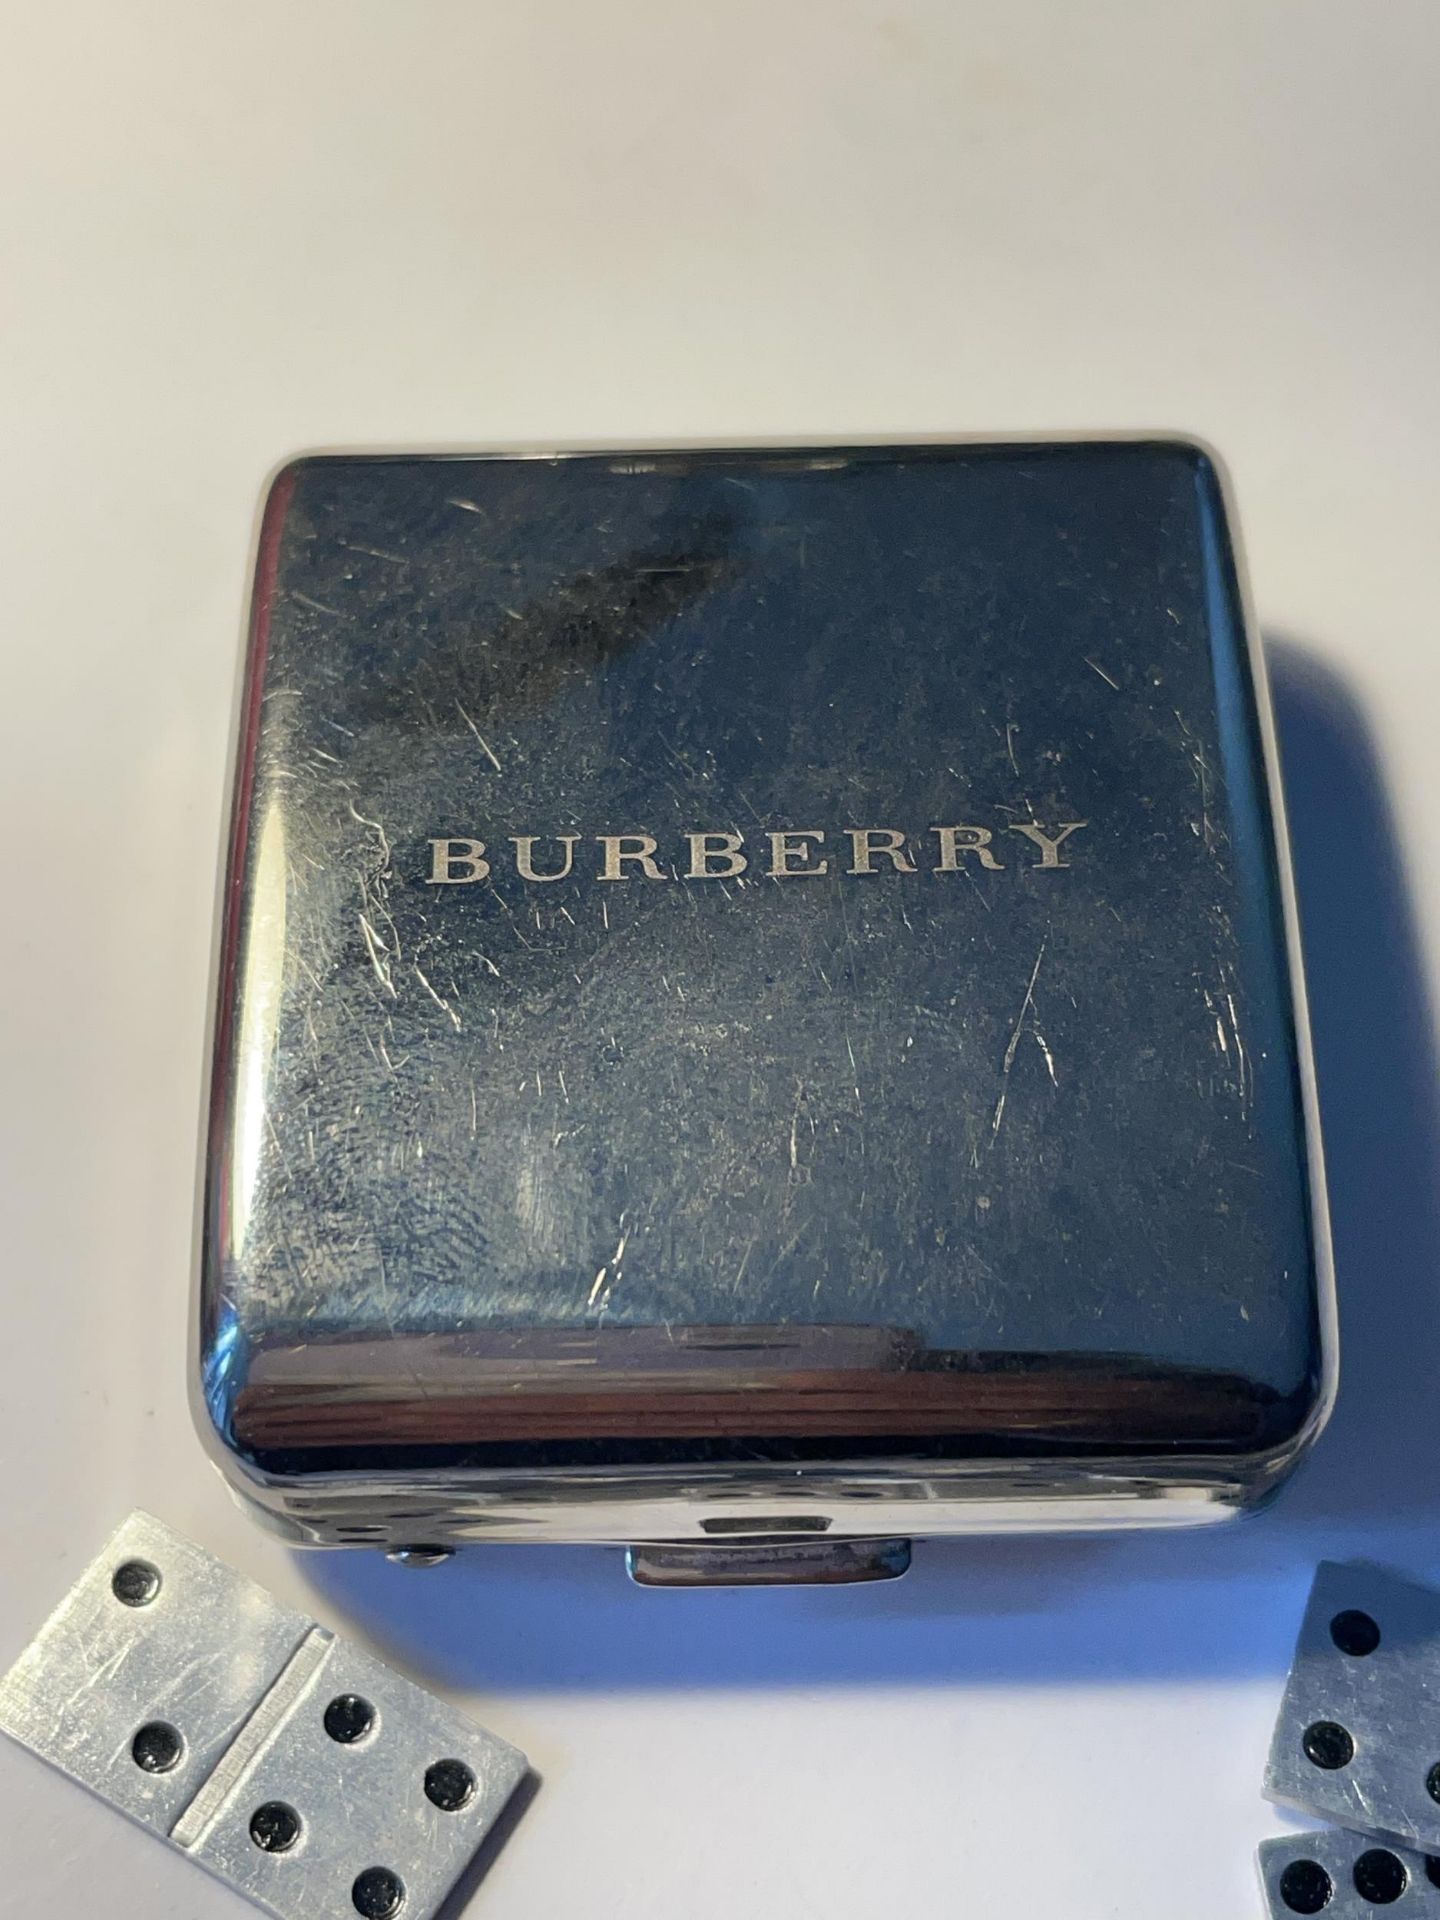 A VINTAGE BURBERRY MINIATURE POCKET SIZED DOMINO SET WITH TWENTY SEVEN DOMINOES - Image 3 of 4